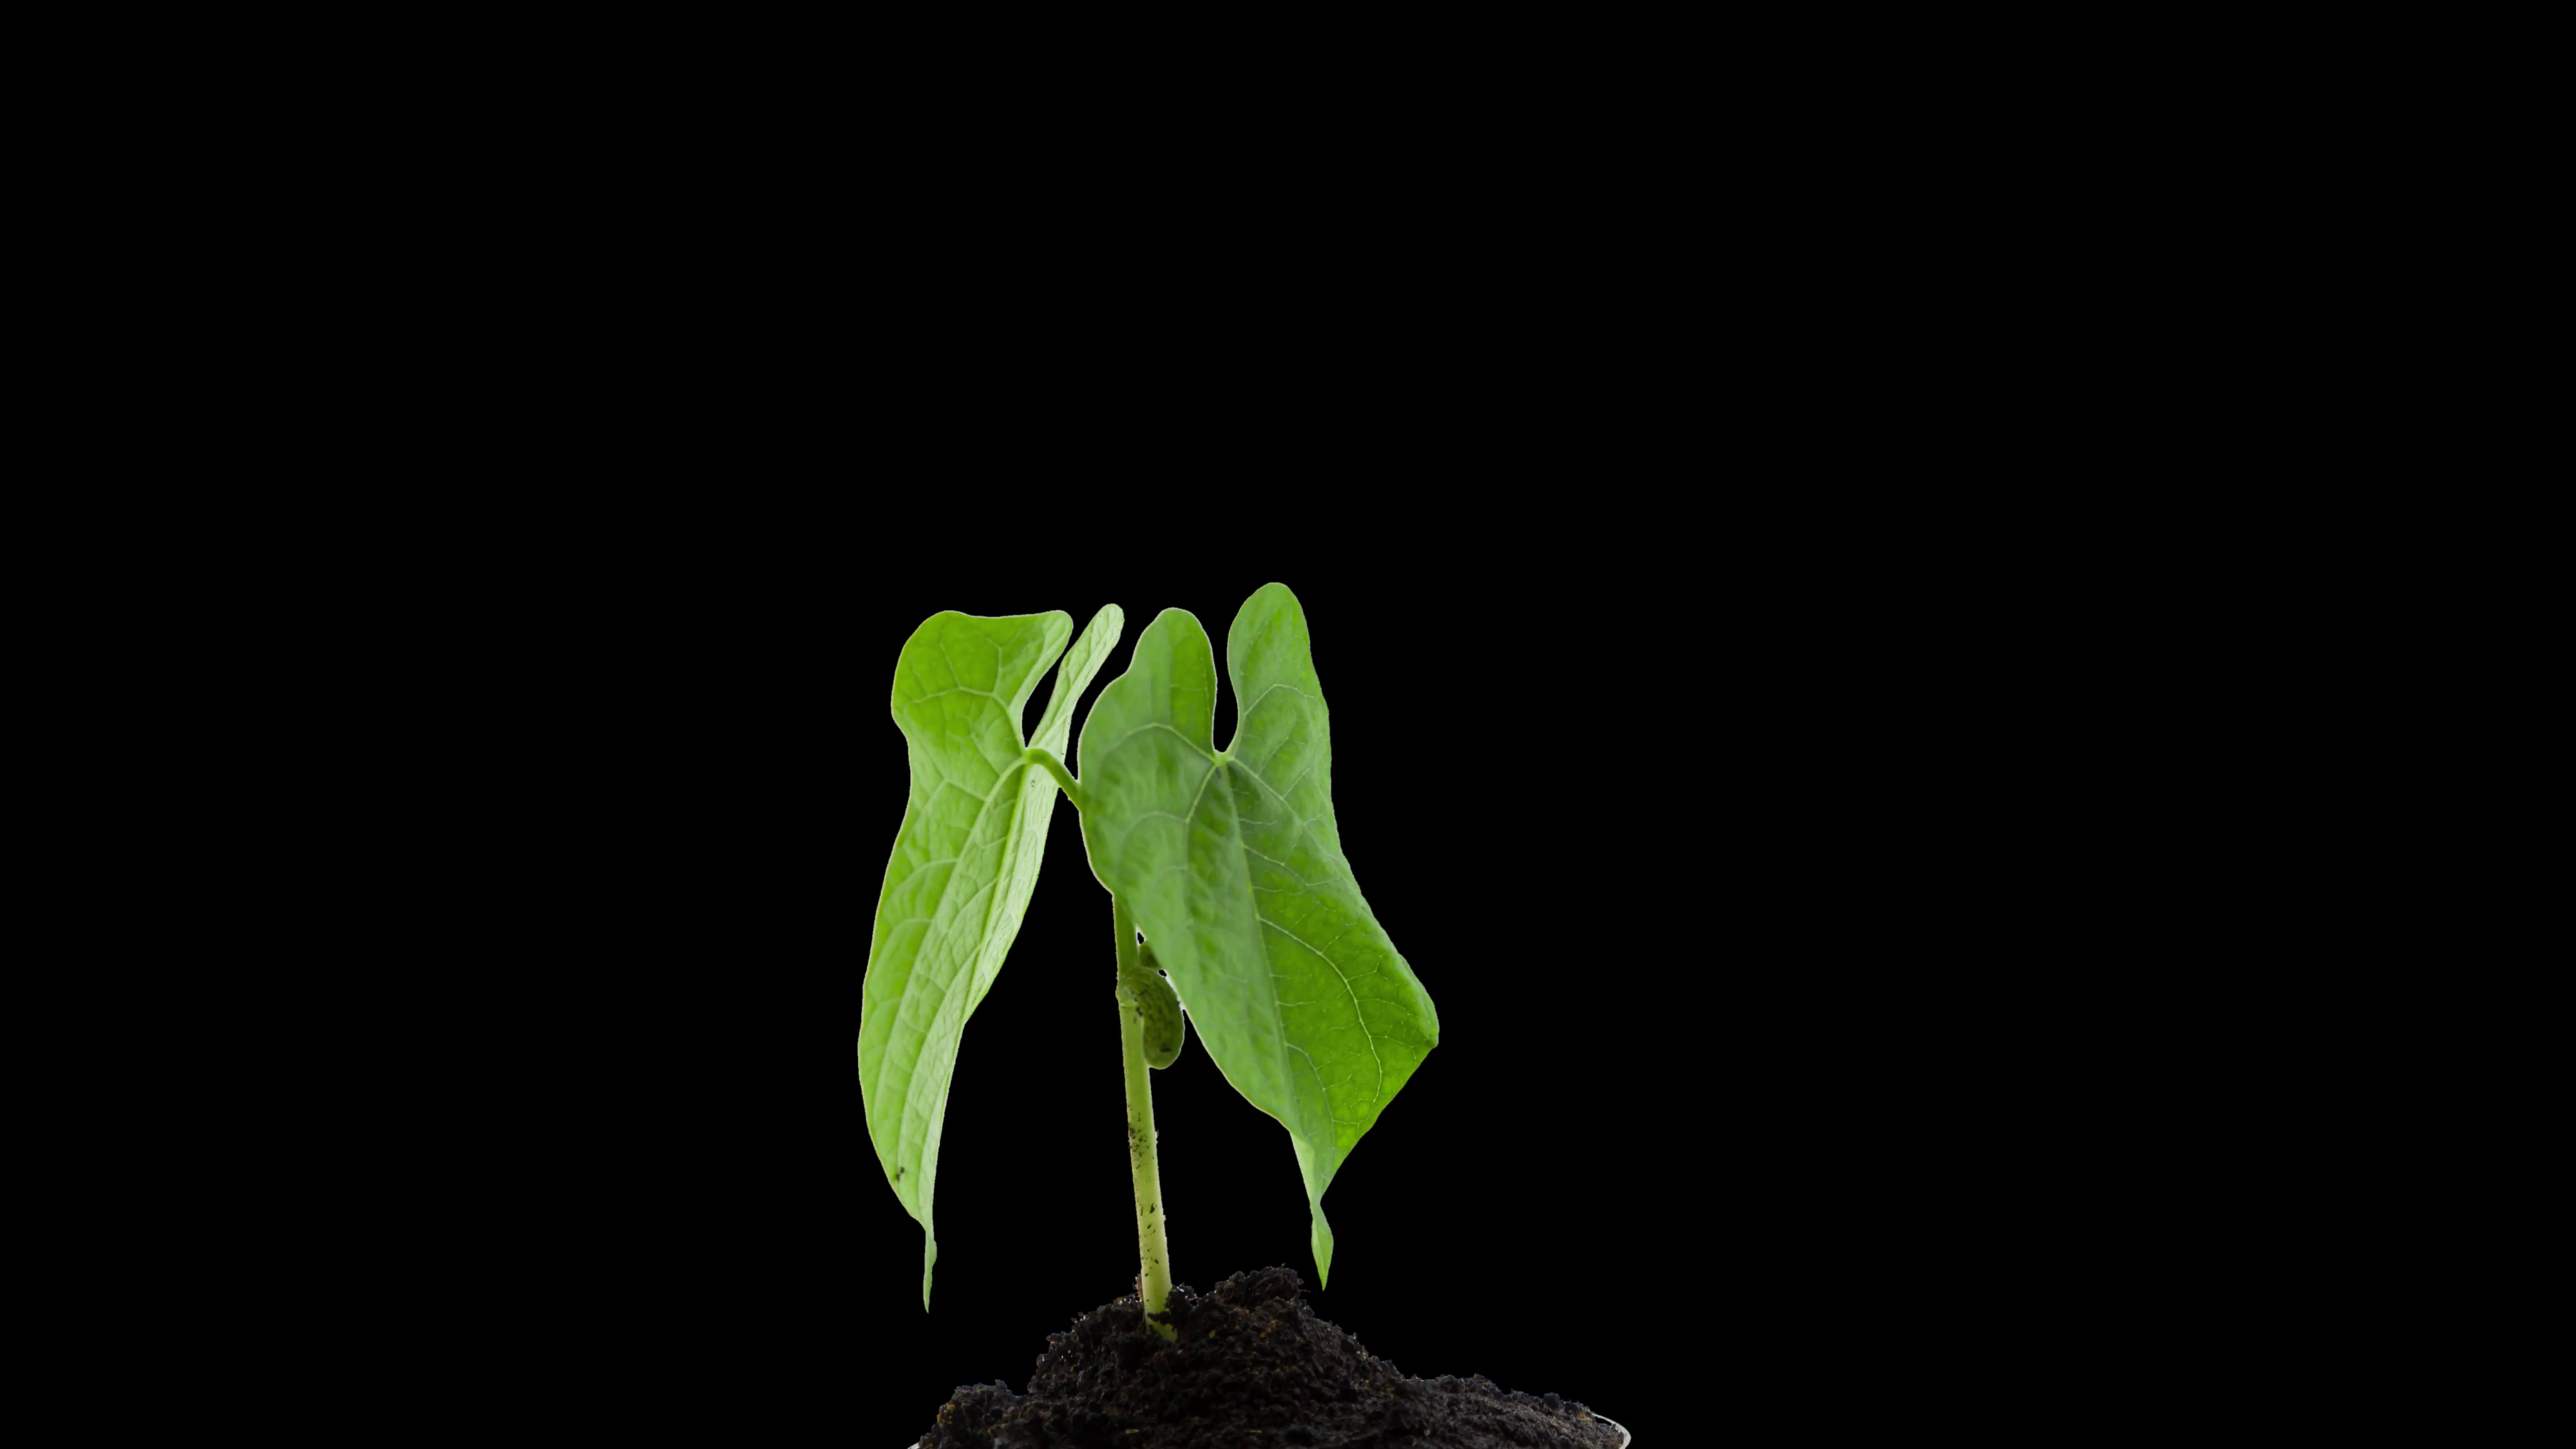 Grows Sprouting Out Of Ground, plant timelapse Growing Stock Video ...